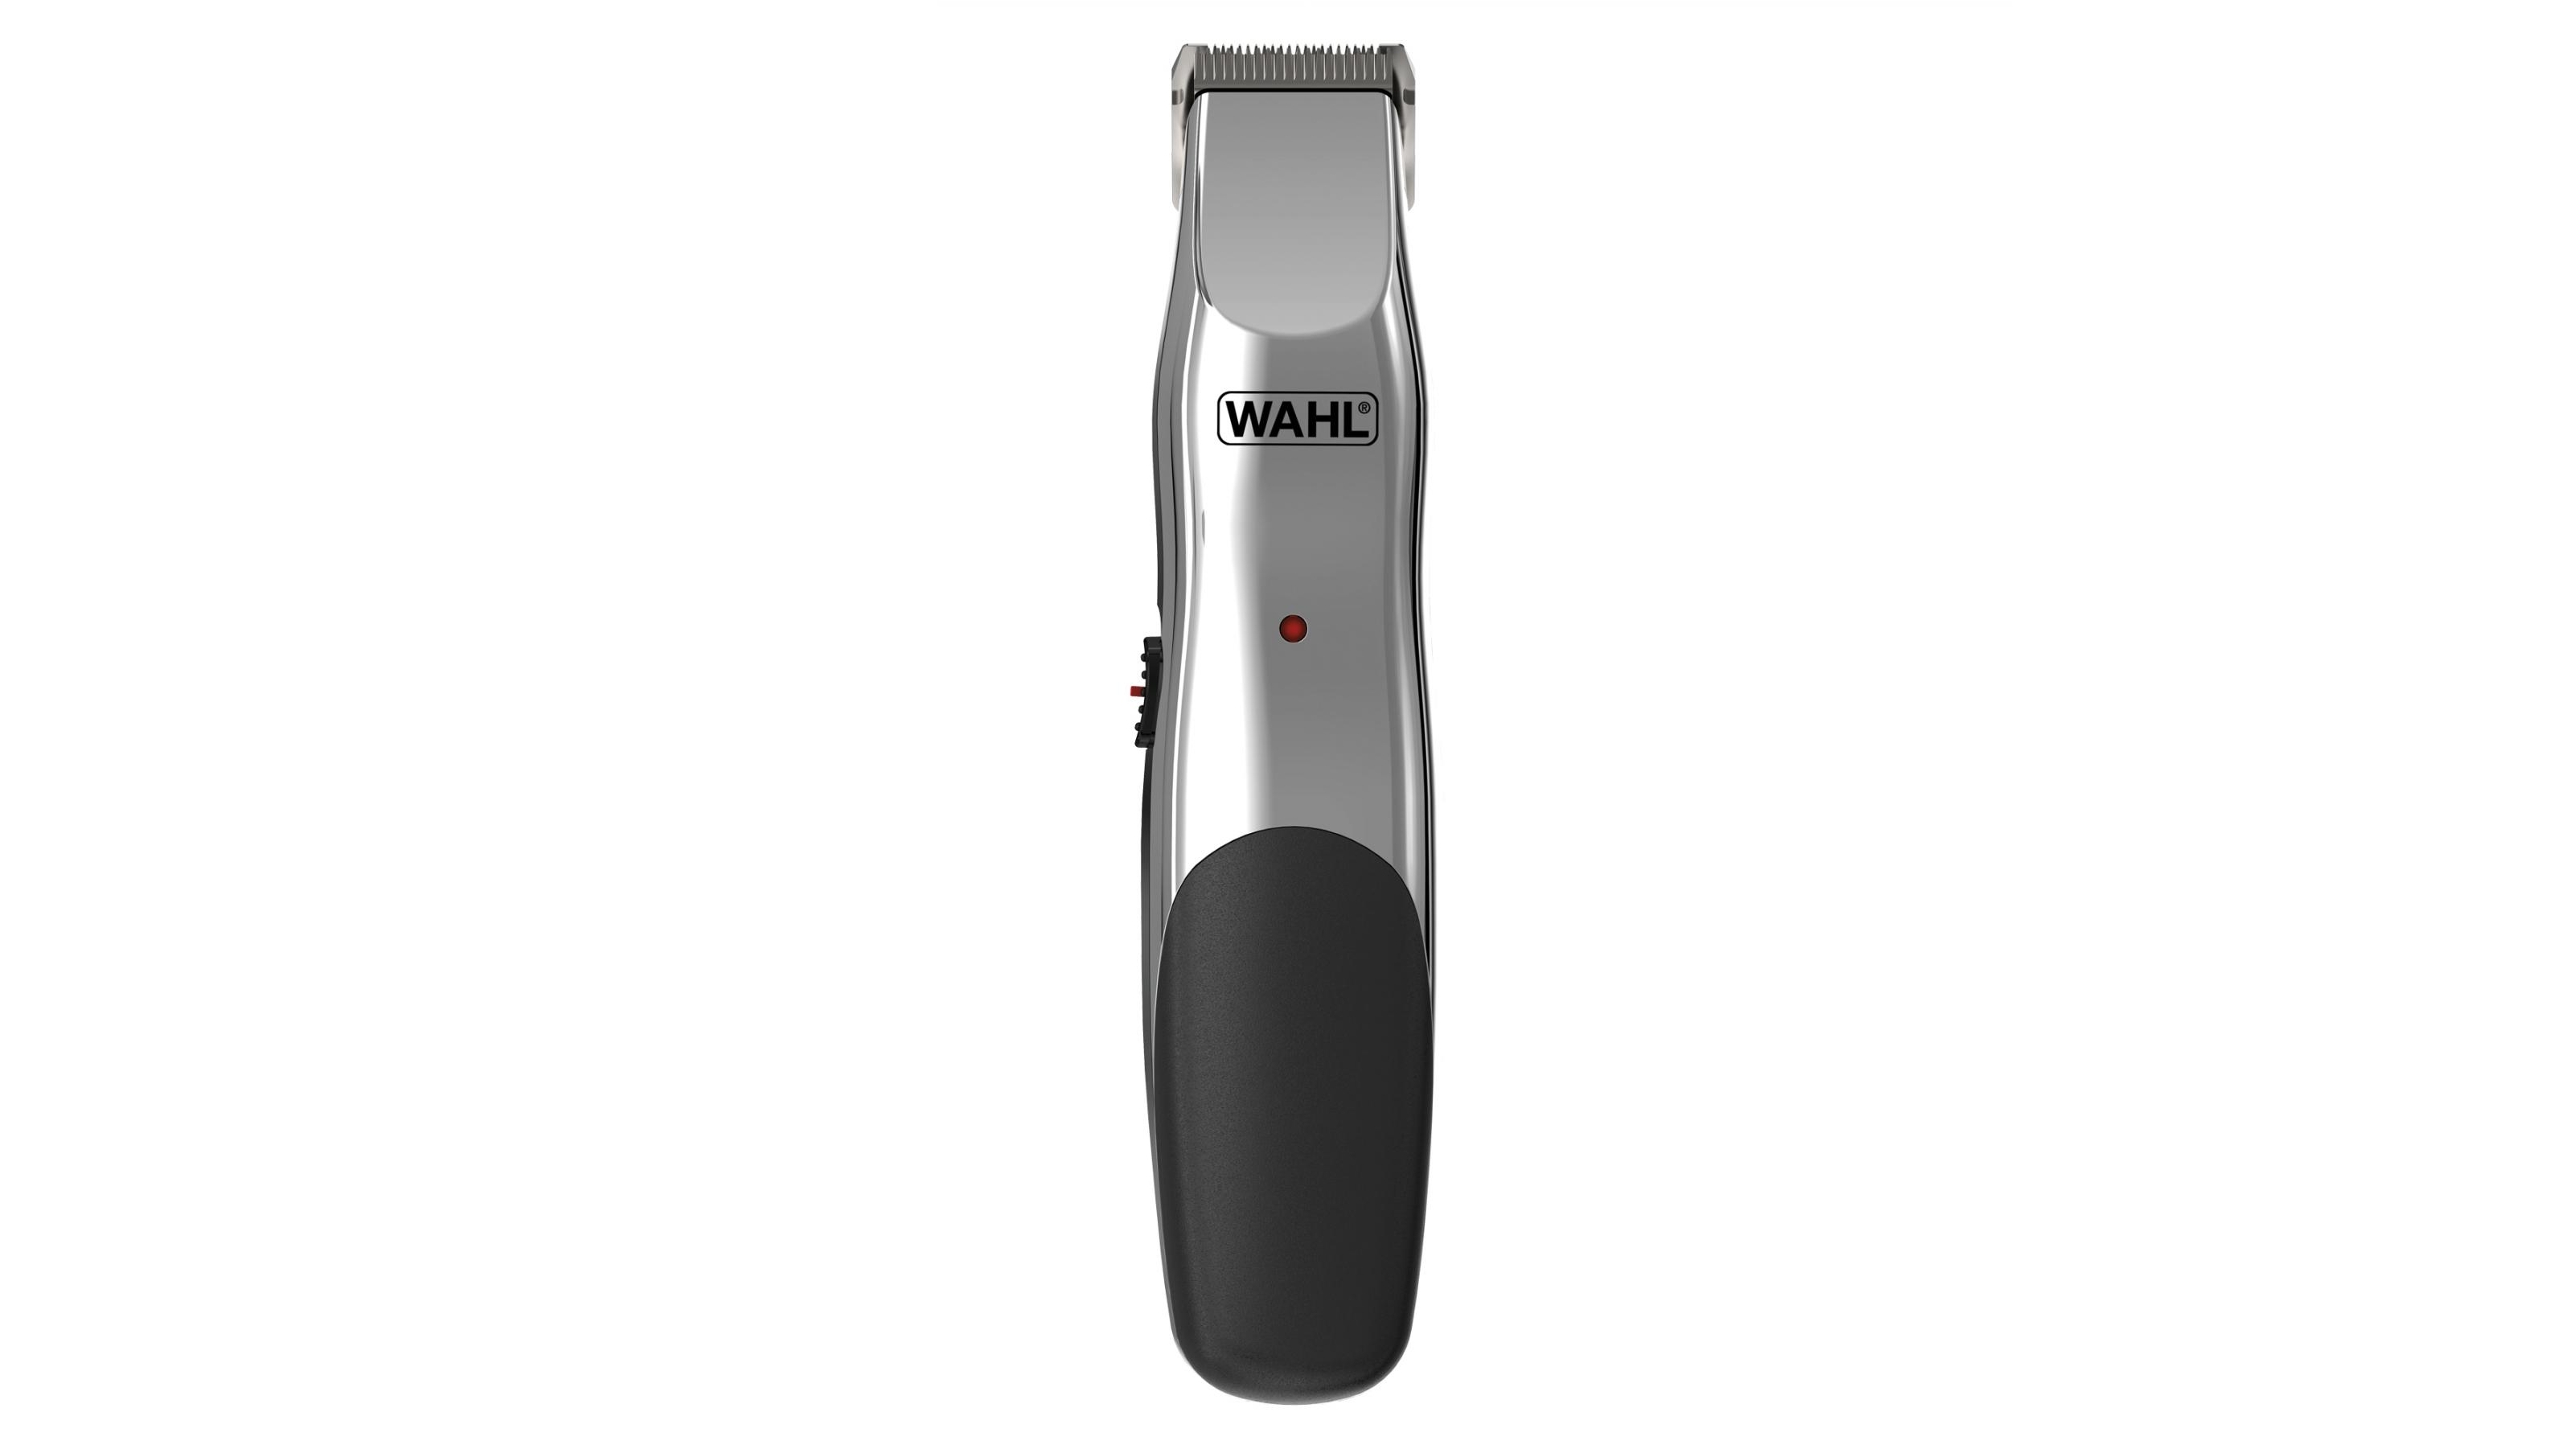 WAHL Mens Precision Beard and Stubble Trimmer Model 9867-200 